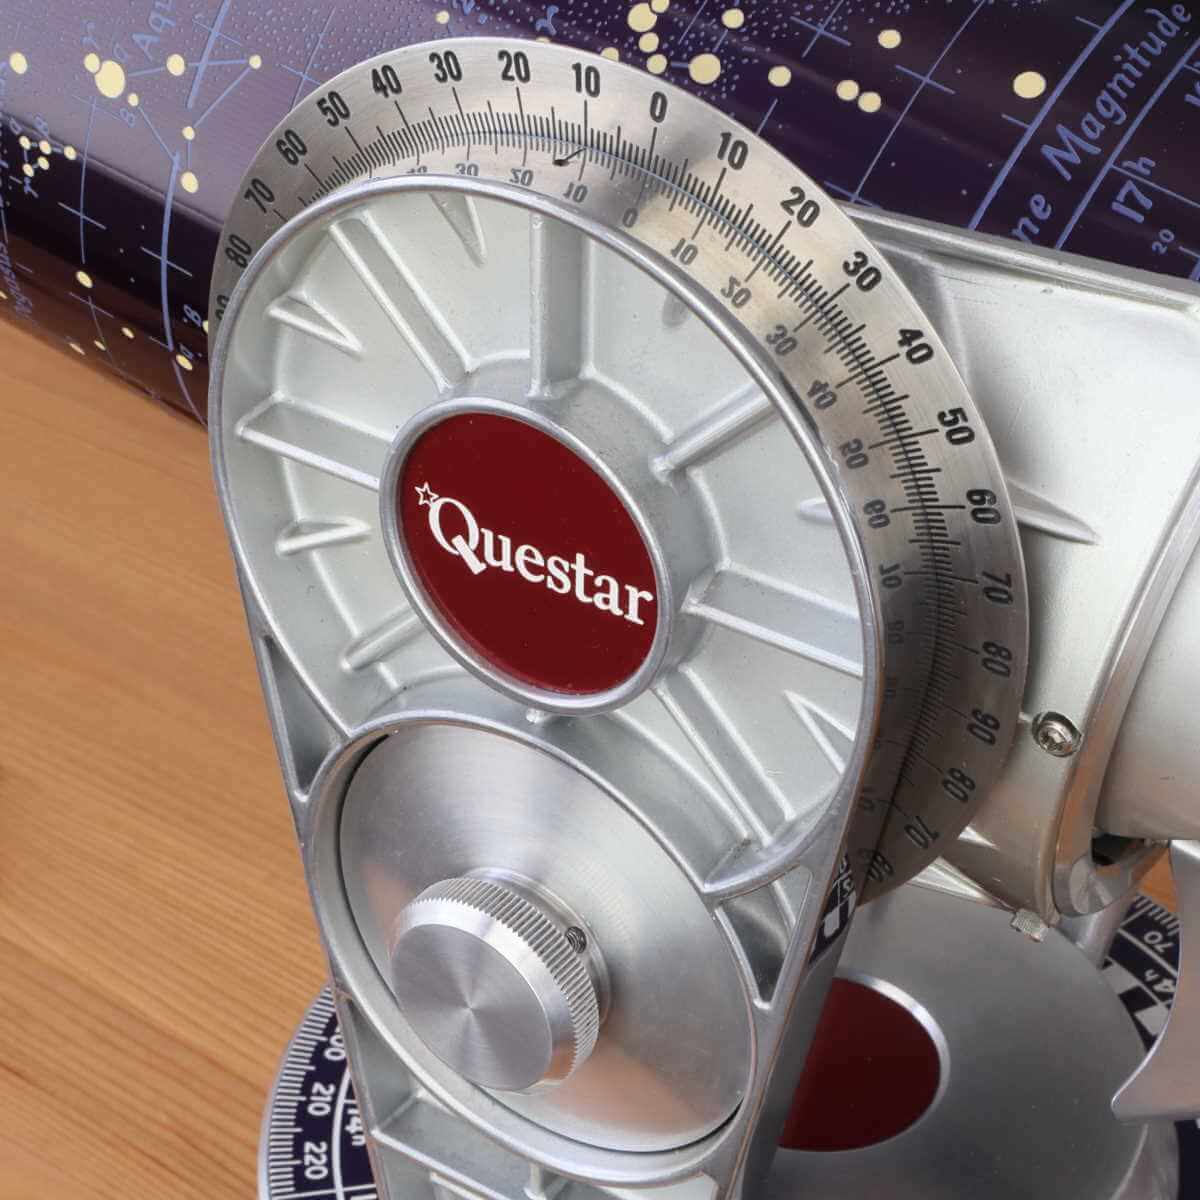 Questar’s logo badge and painted side arm finish